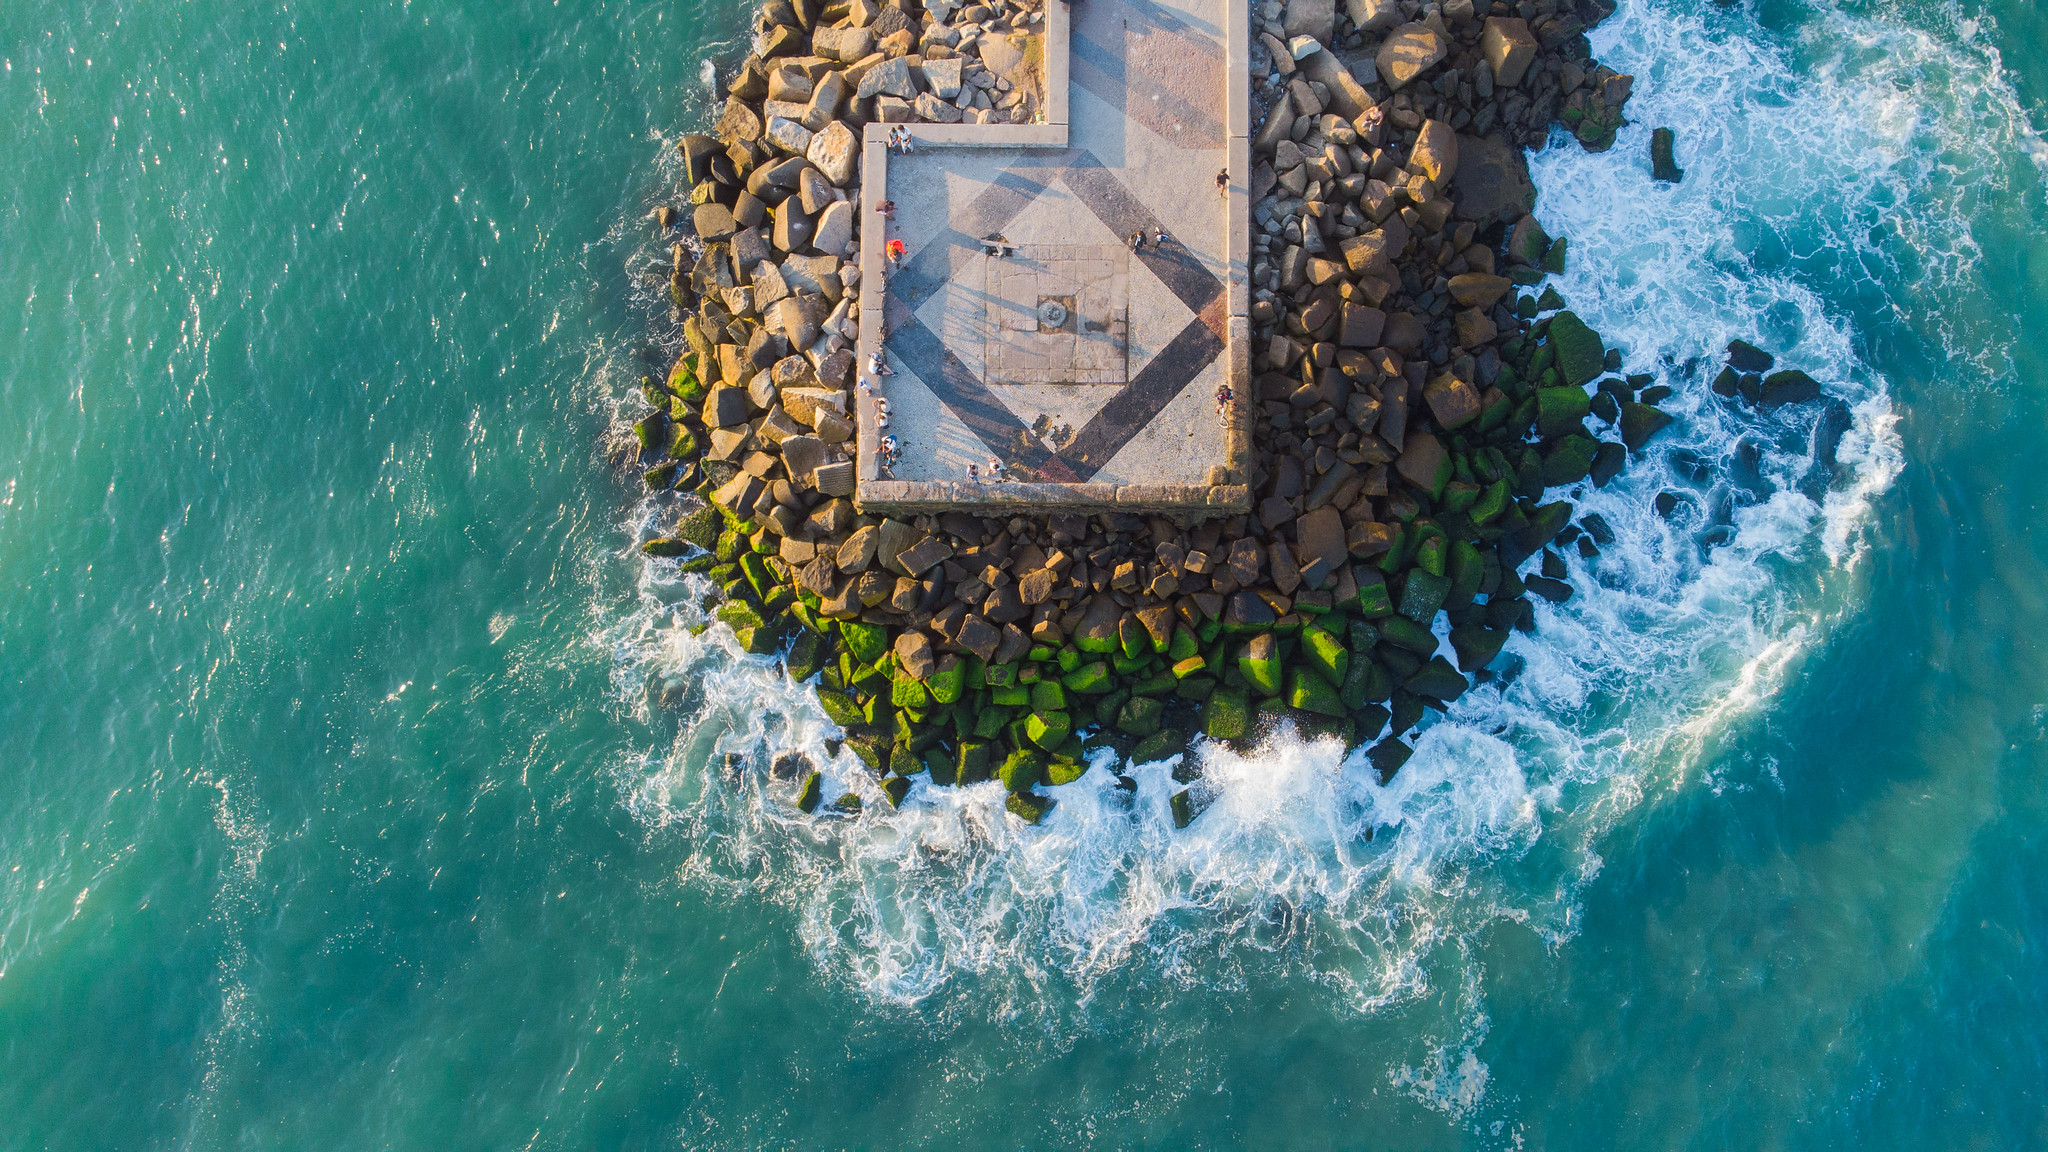 A concrete pier ends in a small square. The pier is built on top of a mound of rocks. It's surrounded by water that is frothing against the rocks.